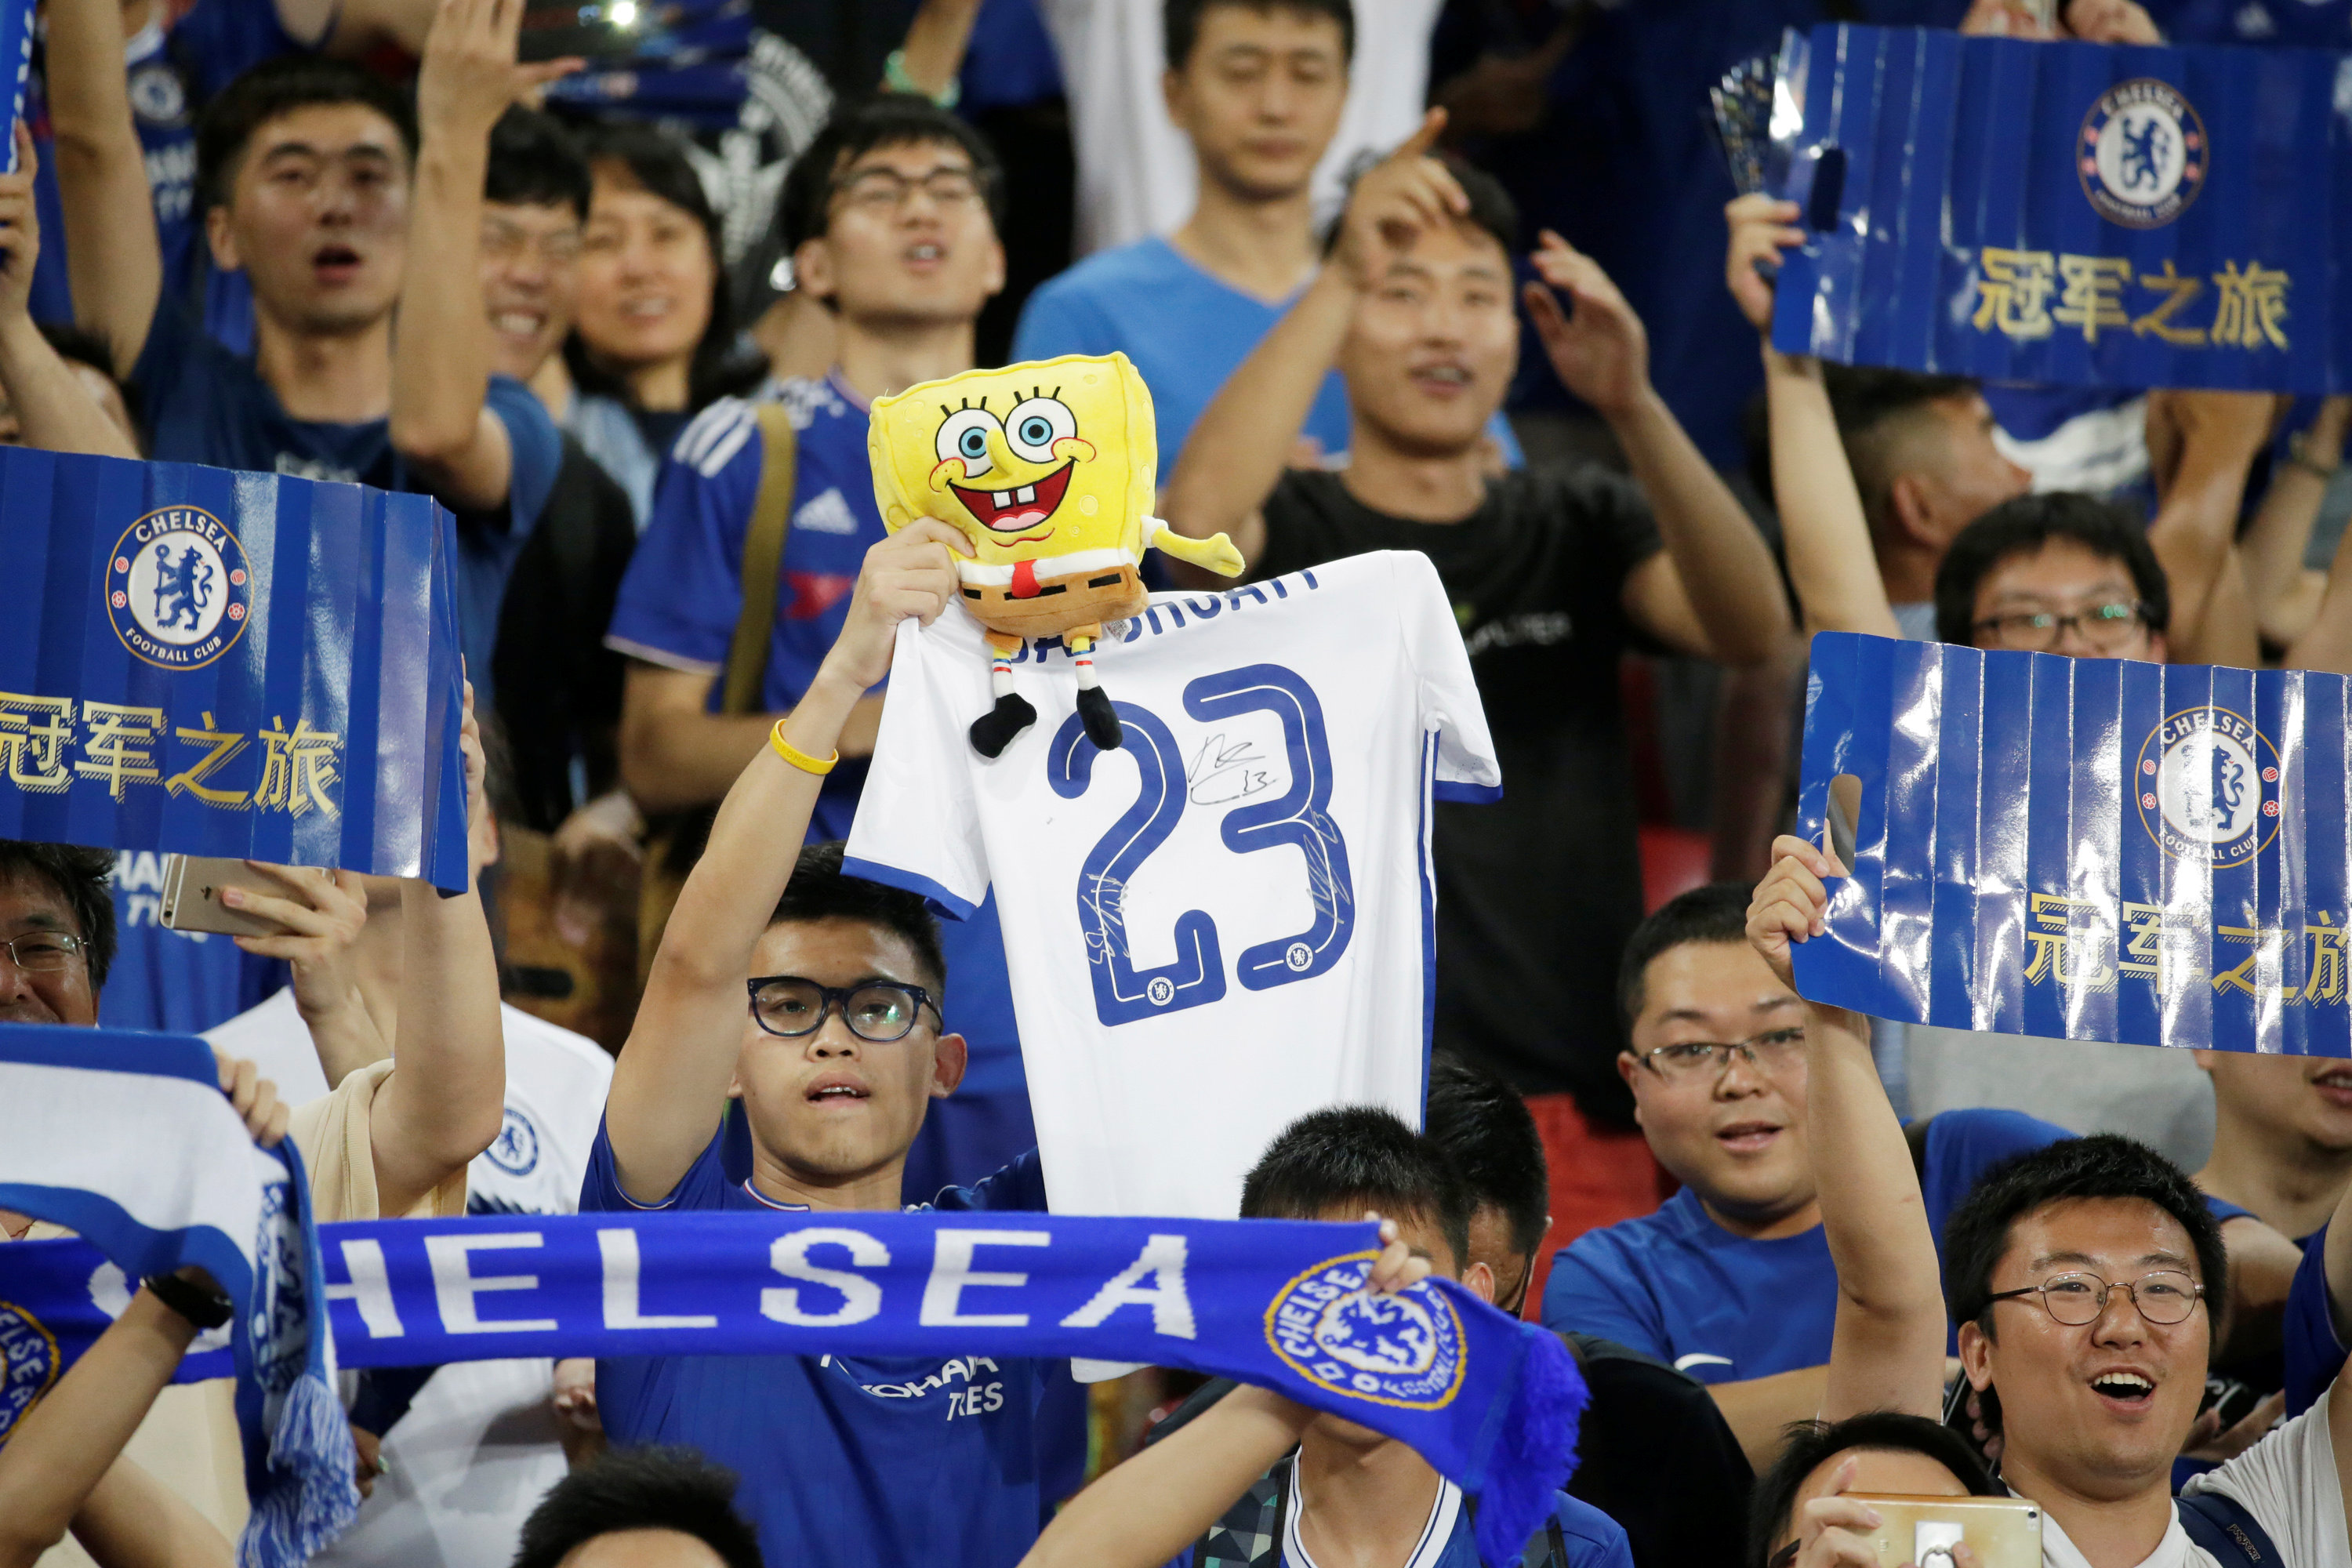 Chelsea player sent home over China slurs: reports - eNCA